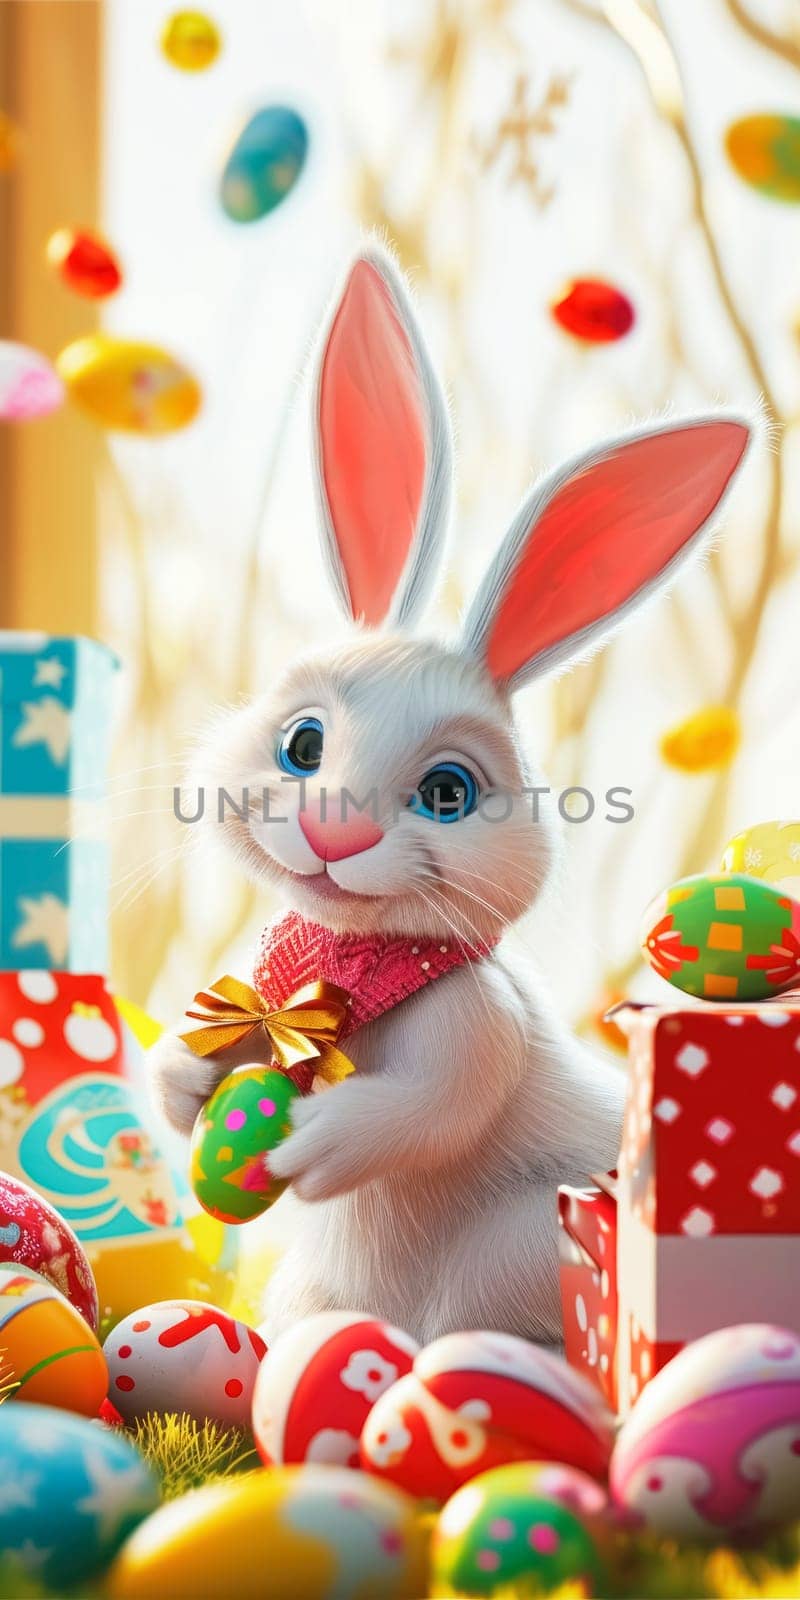 An adorable cartoon Easter bunny holding a decorated egg, surrounded by a variety of colorful eggs and gift boxes, celebrating the festive spirit.